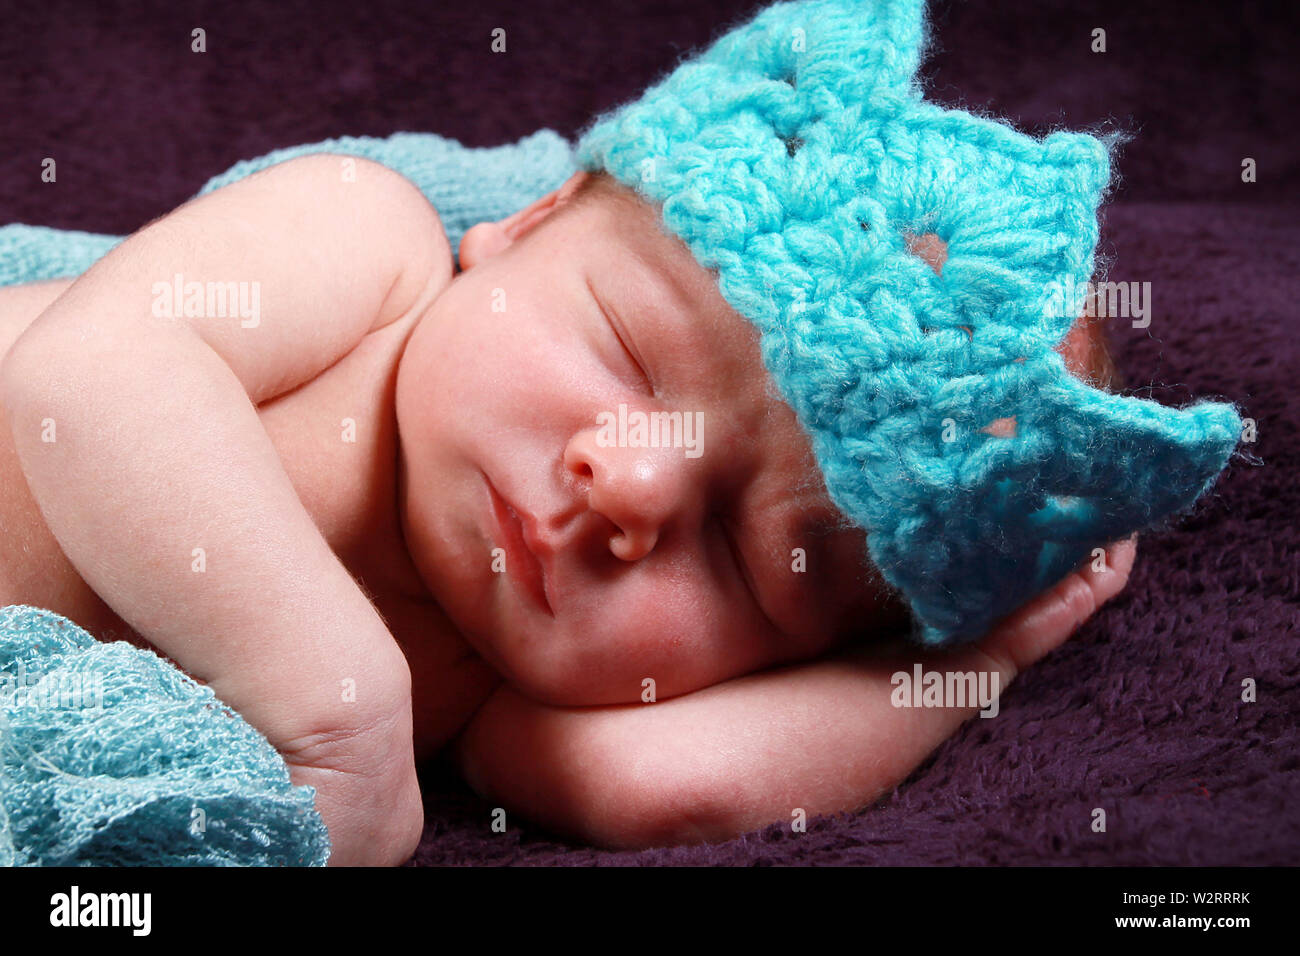 Baby Boy sleeping Banque D'Images